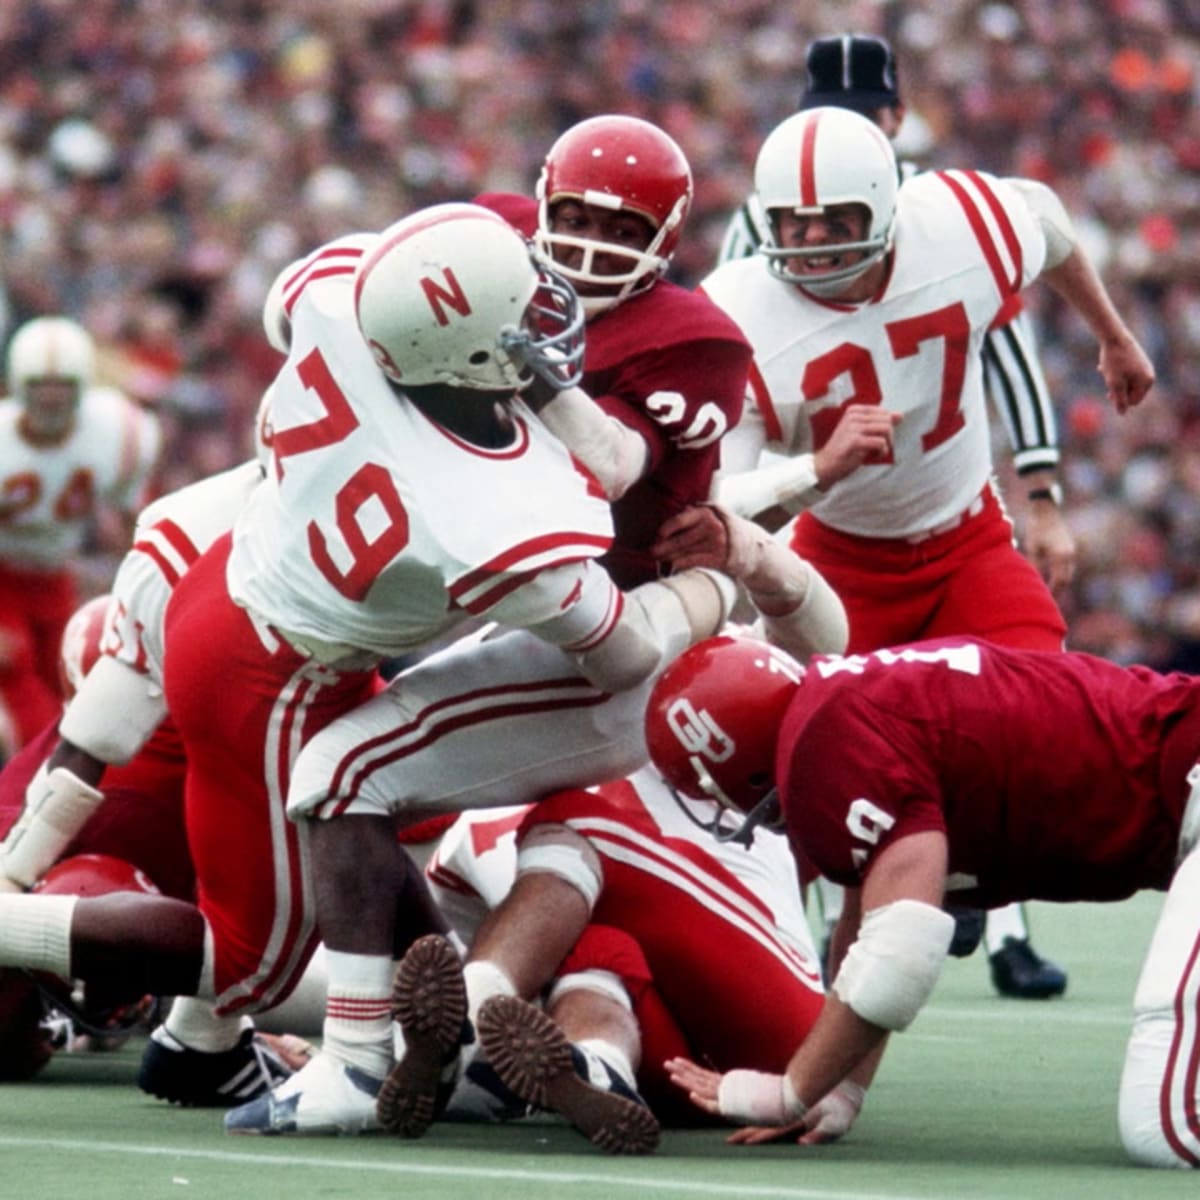 Rich Glover and Greg Pruitt - All Huskers